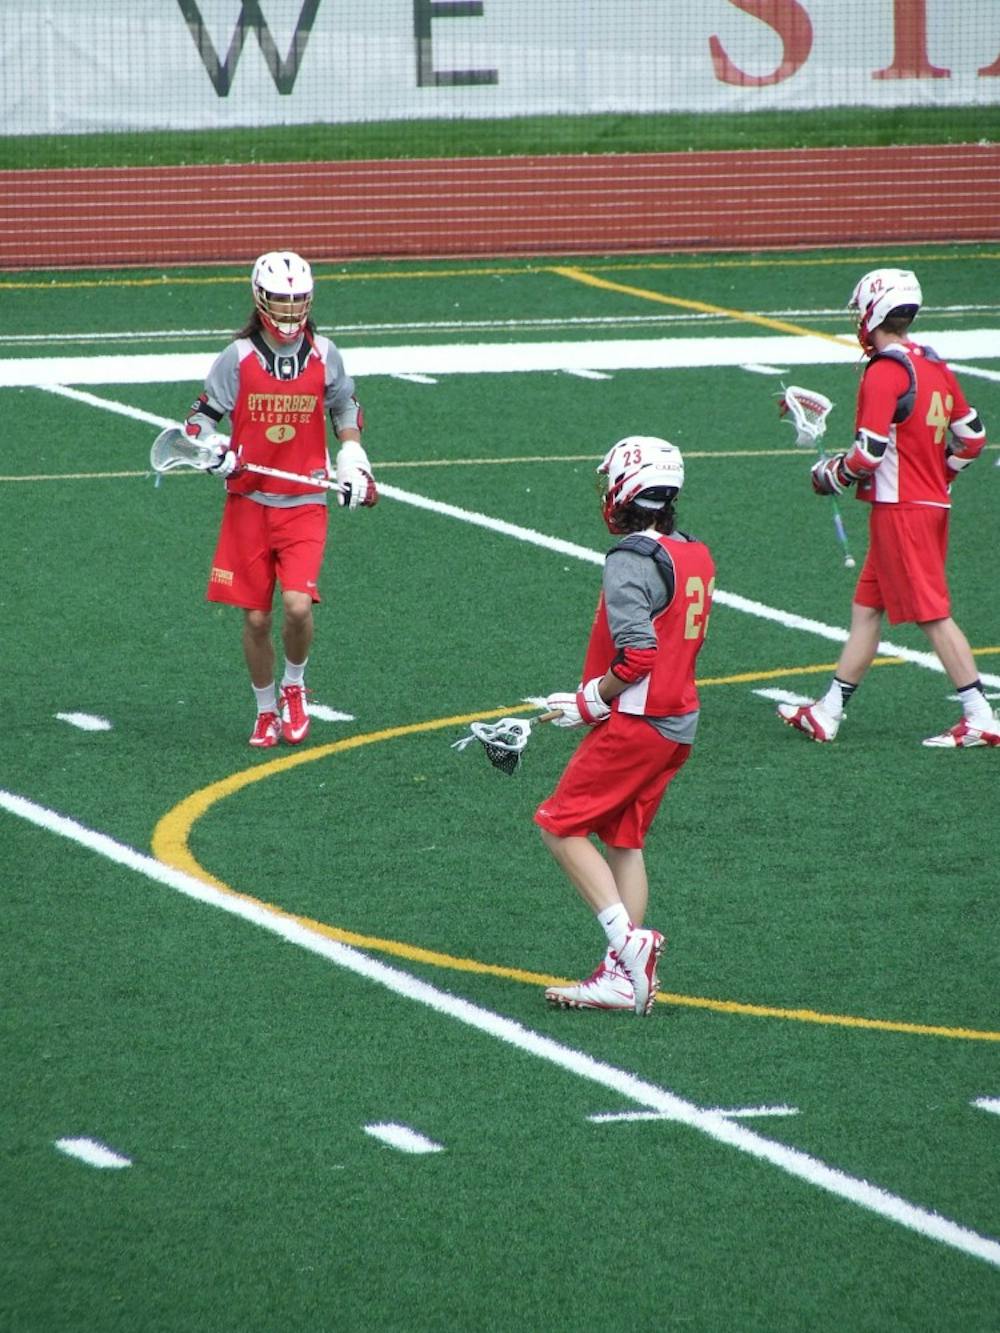 <p>The Otterbein men's lacrosse team practicing at Memorial field. The team and its players have been nominated for seven Cardy Awards this season.</p>